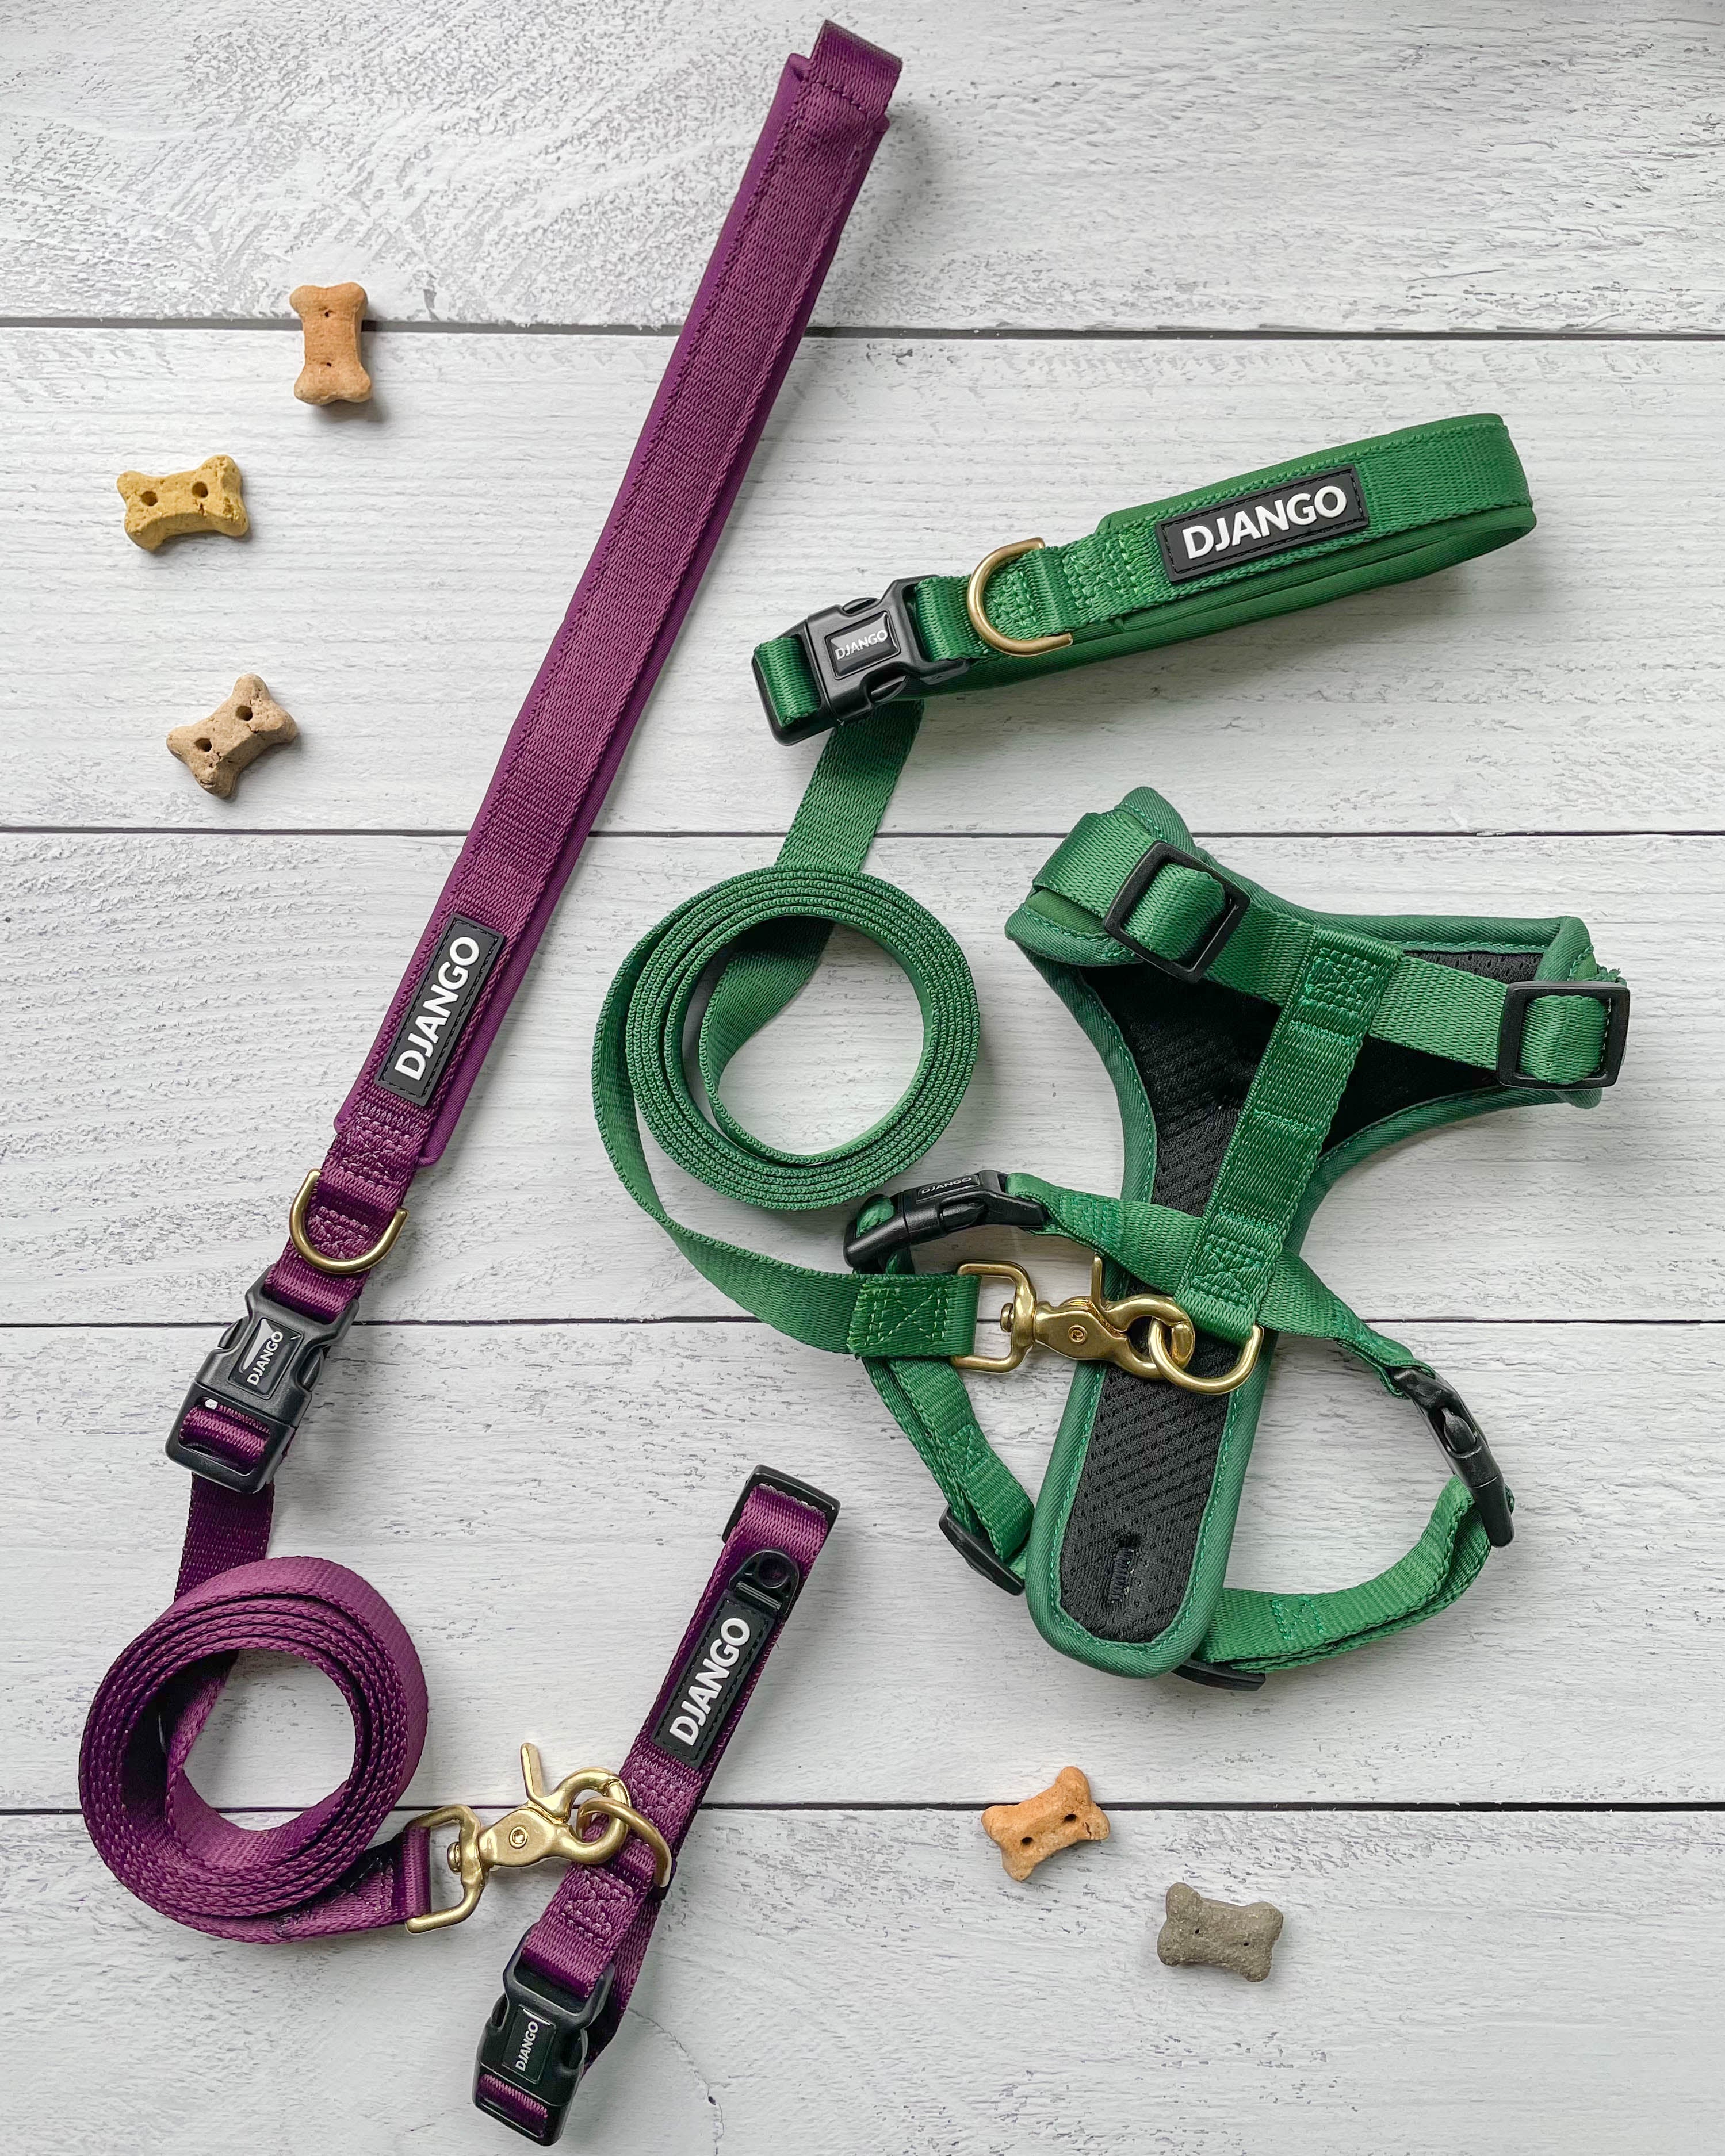 DJANGO Adjustable Hands-Free Adventure Dog Leash features solid cast brass hardware and pairs perfectly with your favorite DJANGO Adventure Dog Harness and Collar set - djangobrand.com